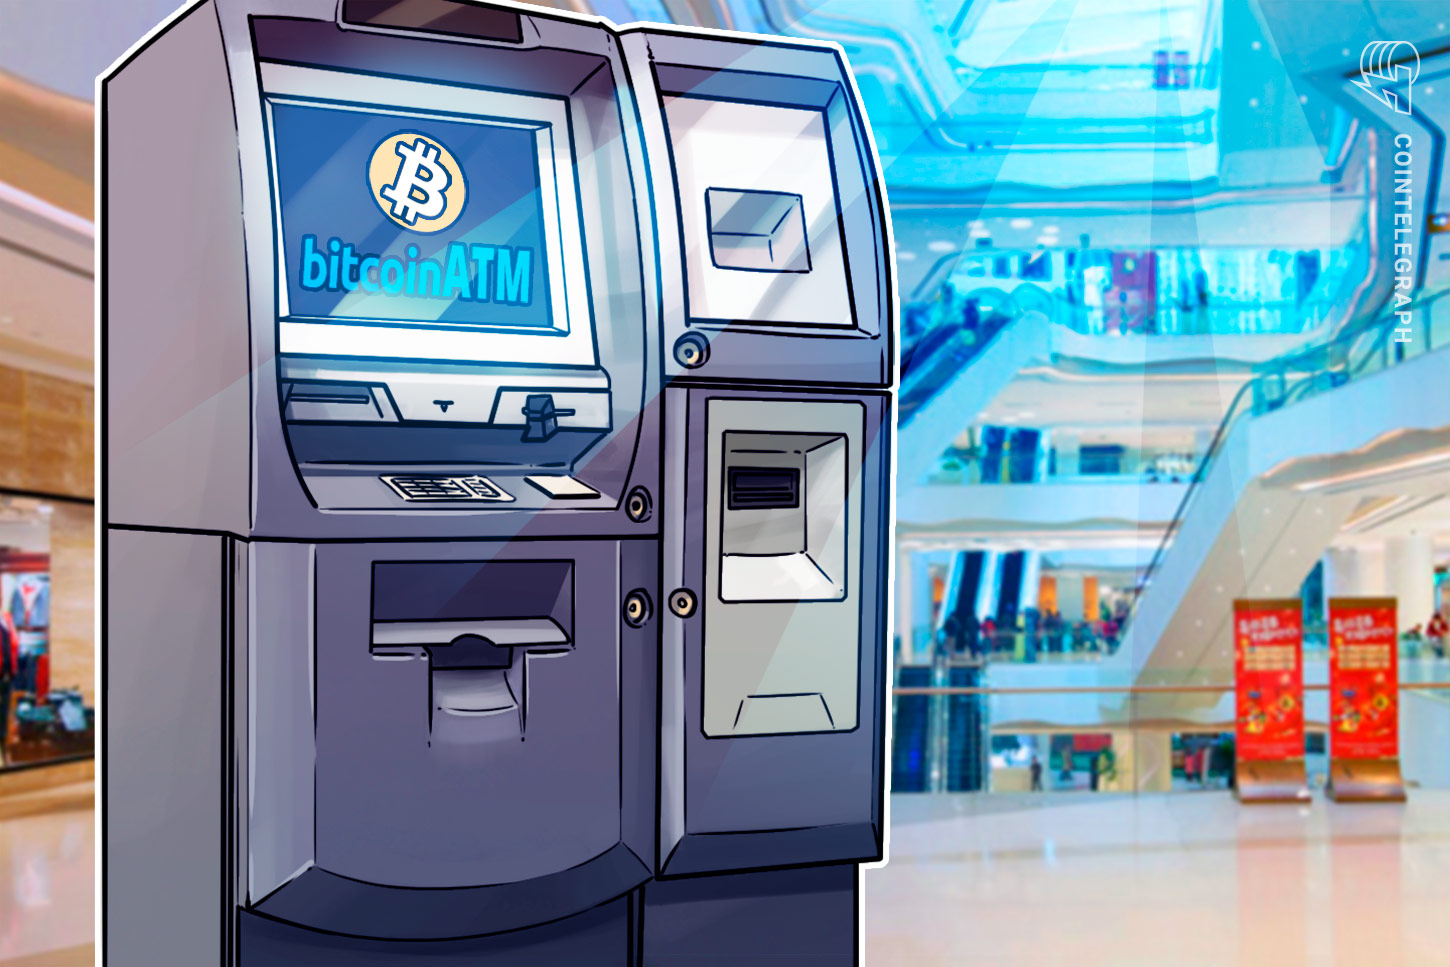 Bitcoin ATMs surge by 87% in previous yr to surpass 10,000 globally